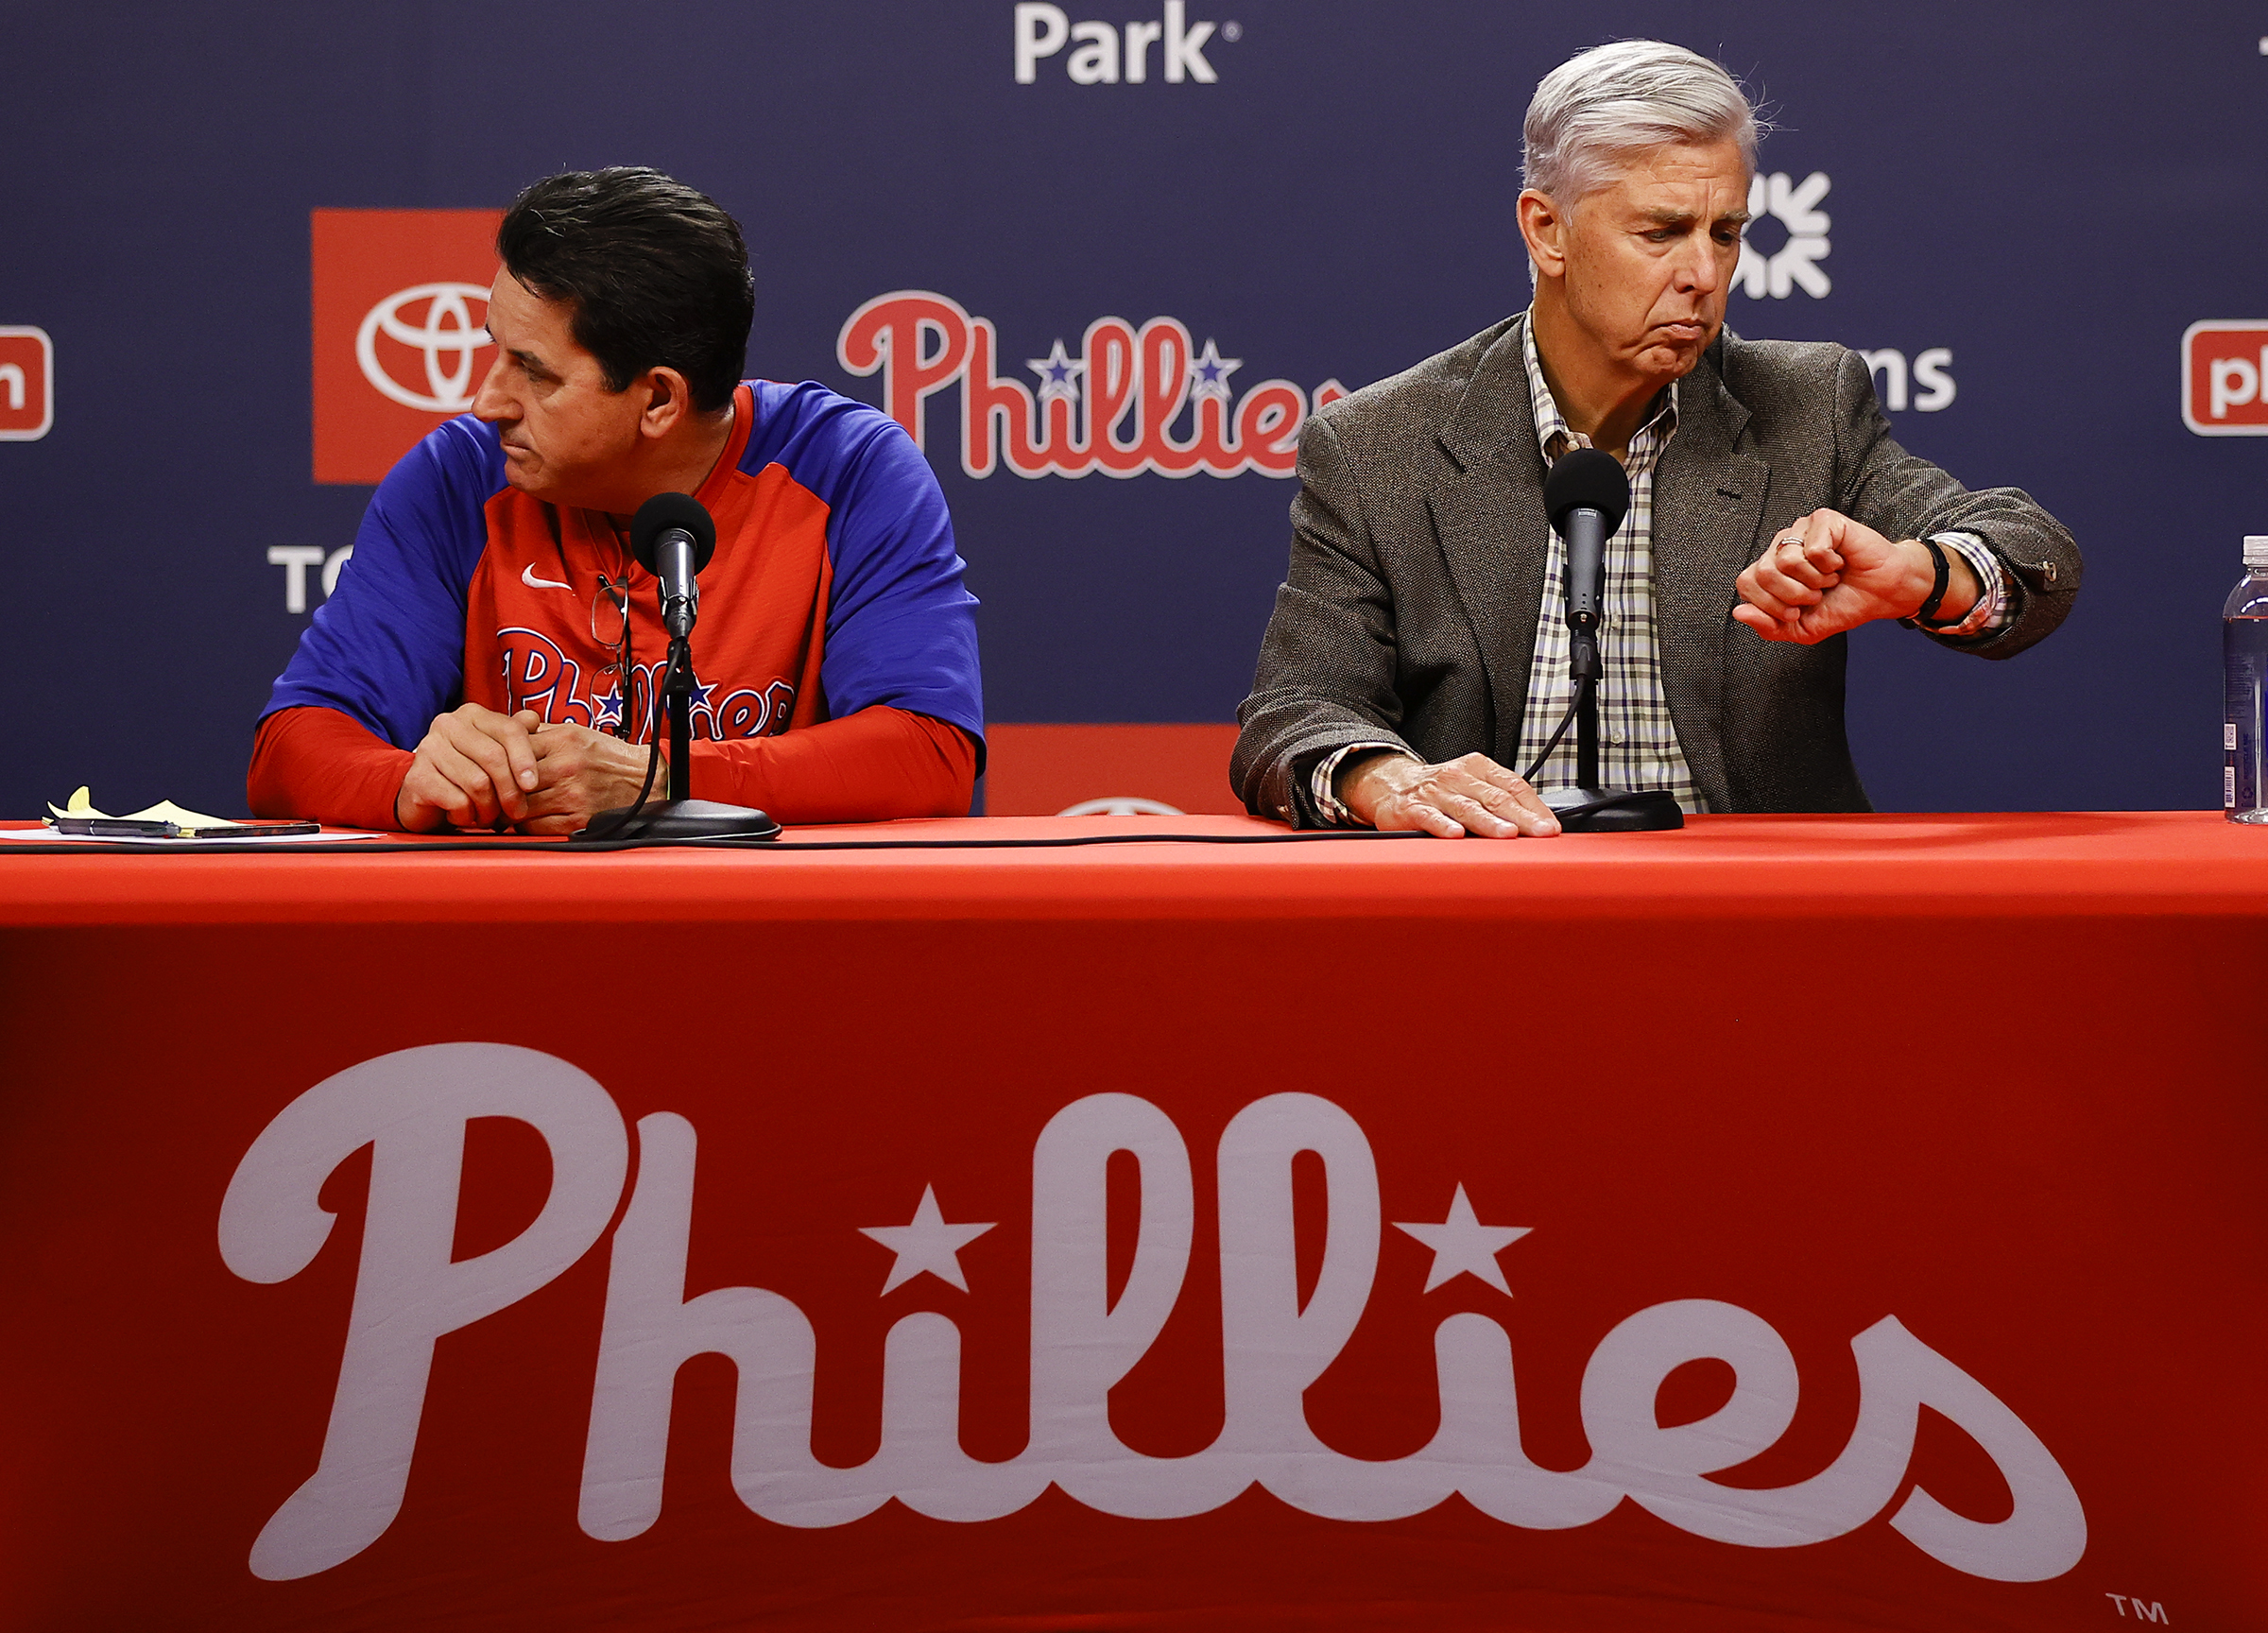 Juan Soto reportedly declines 13-year contract offer from Nationals   Phillies Nation - Your source for Philadelphia Phillies news, opinion,  history, rumors, events, and other fun stuff.